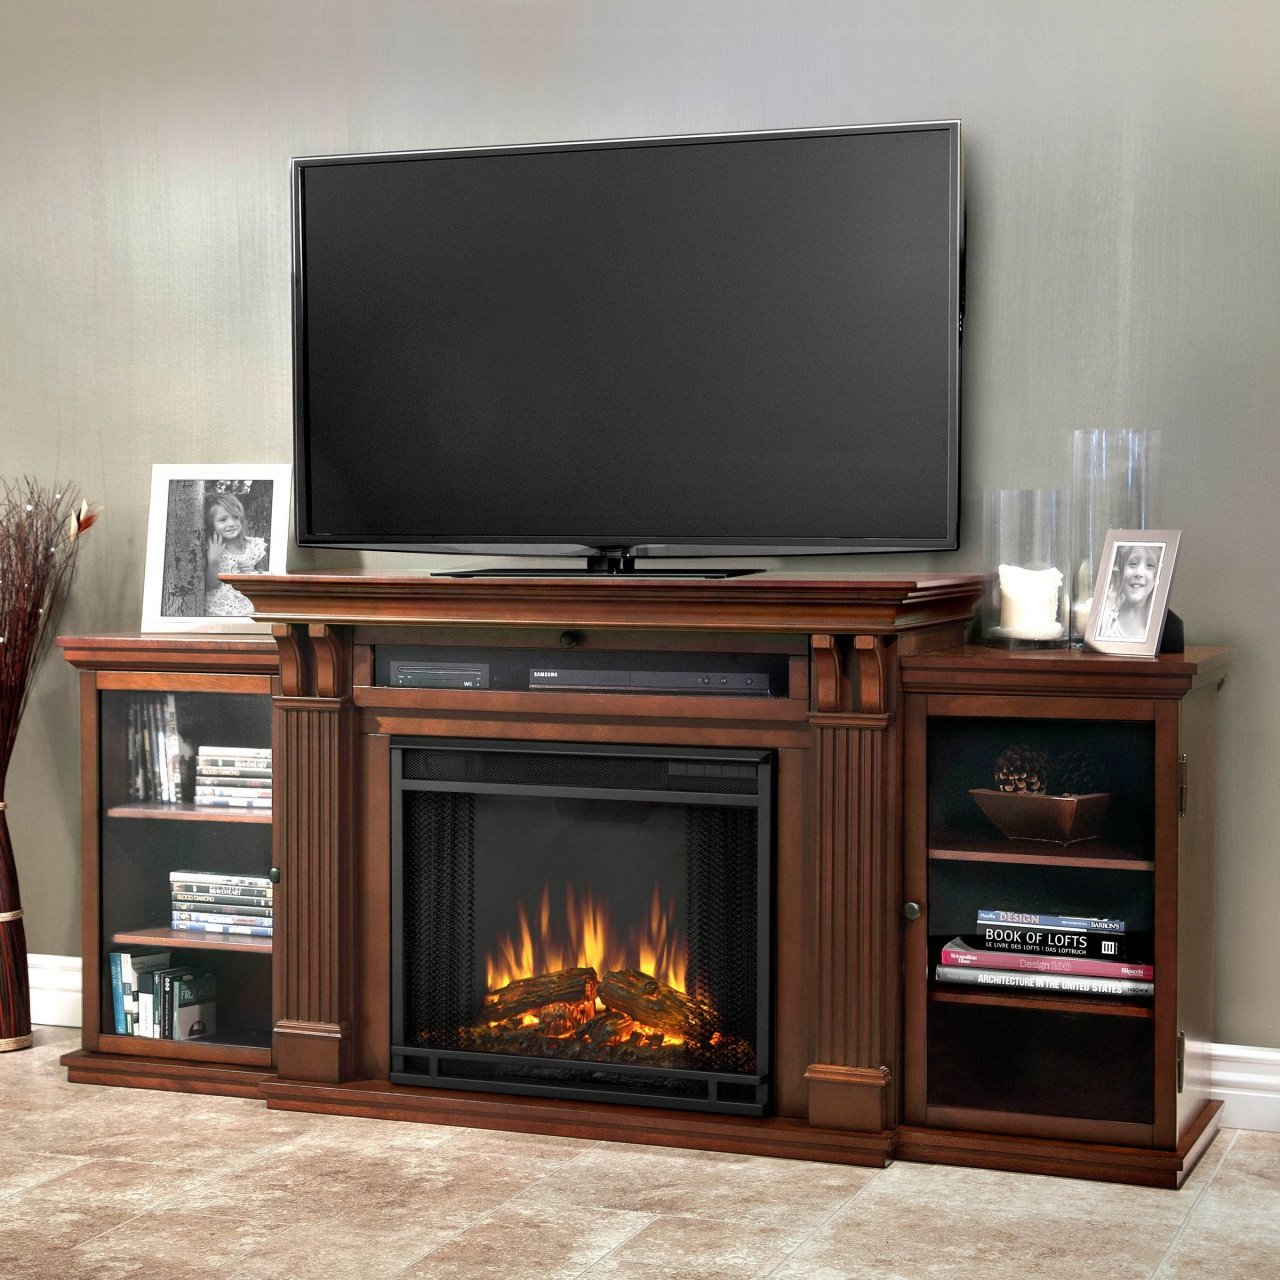 Electric Fireplace Entertainment Center Lowes
 Electric Fireplace Tv Stand Lowes – FIREPLACE IDEAS